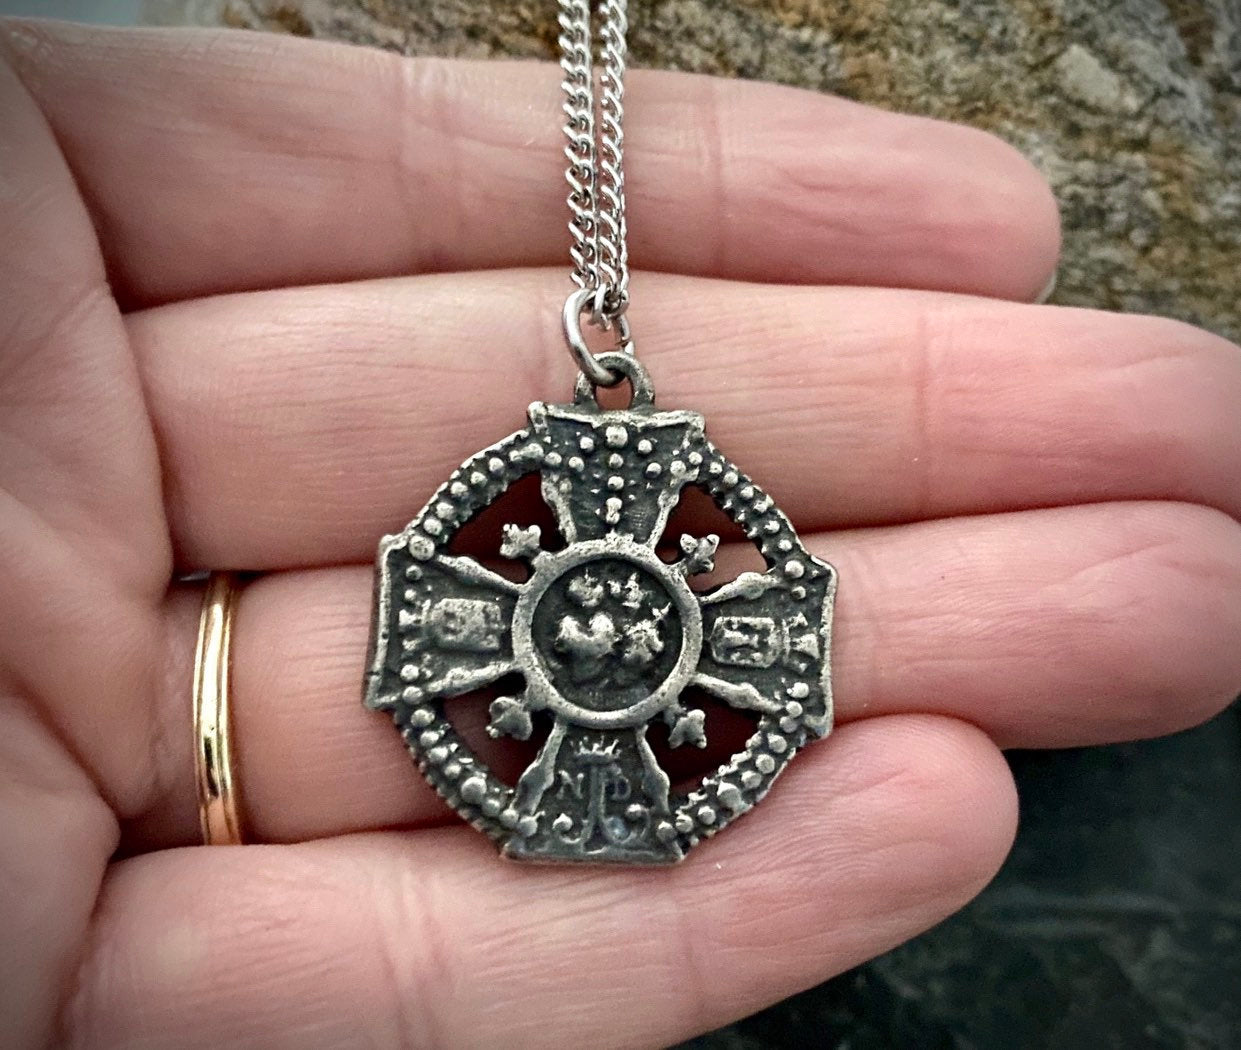 Sacred and Immaculate Hearts in the middle of a cross. The sides of the cross depict "ND" for Notre Dame, 20 or 24 inch chain ST-020